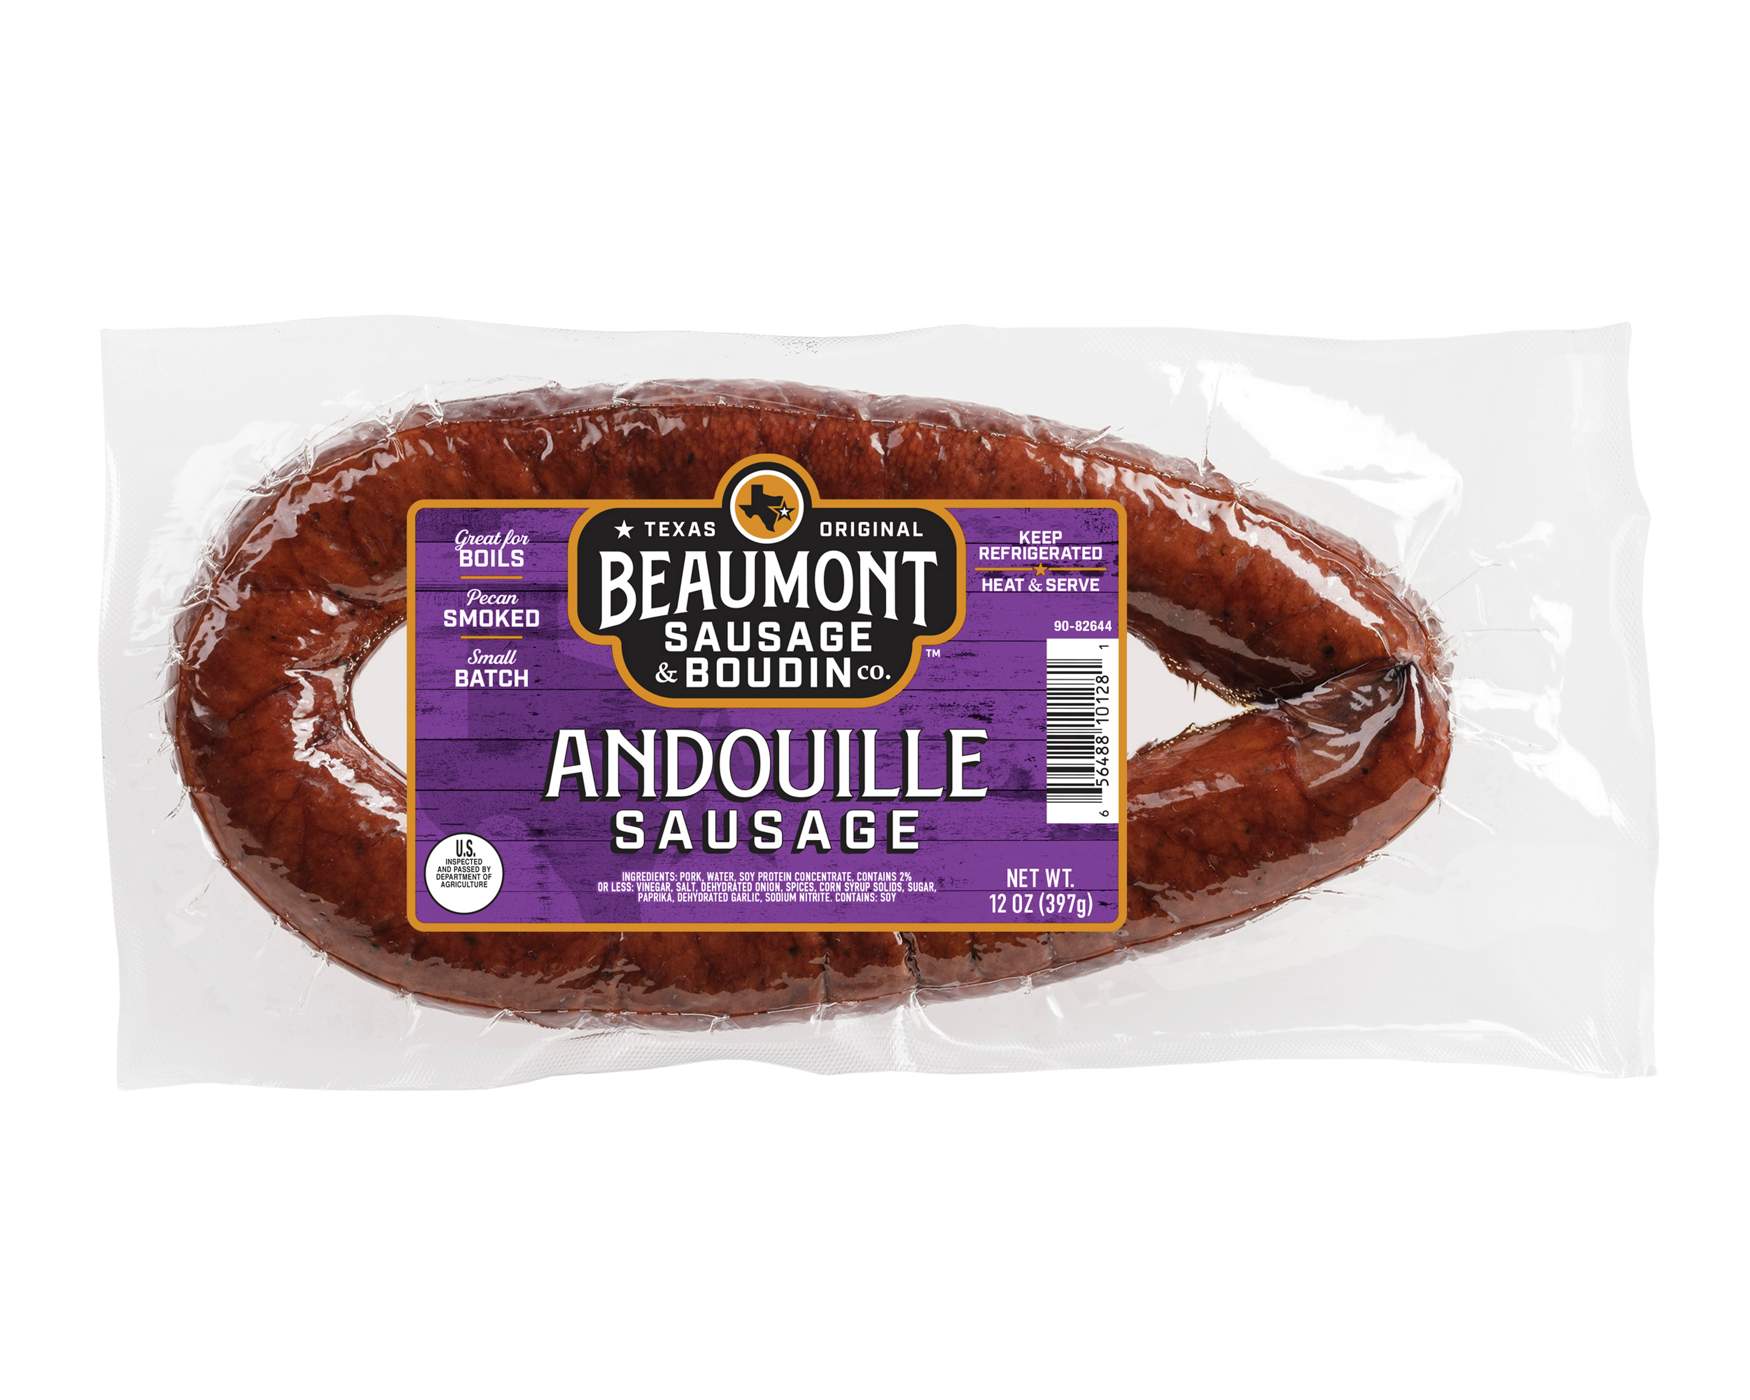 Beaumont Sausage & Boudin Co. Andouille Sausage; image 1 of 2